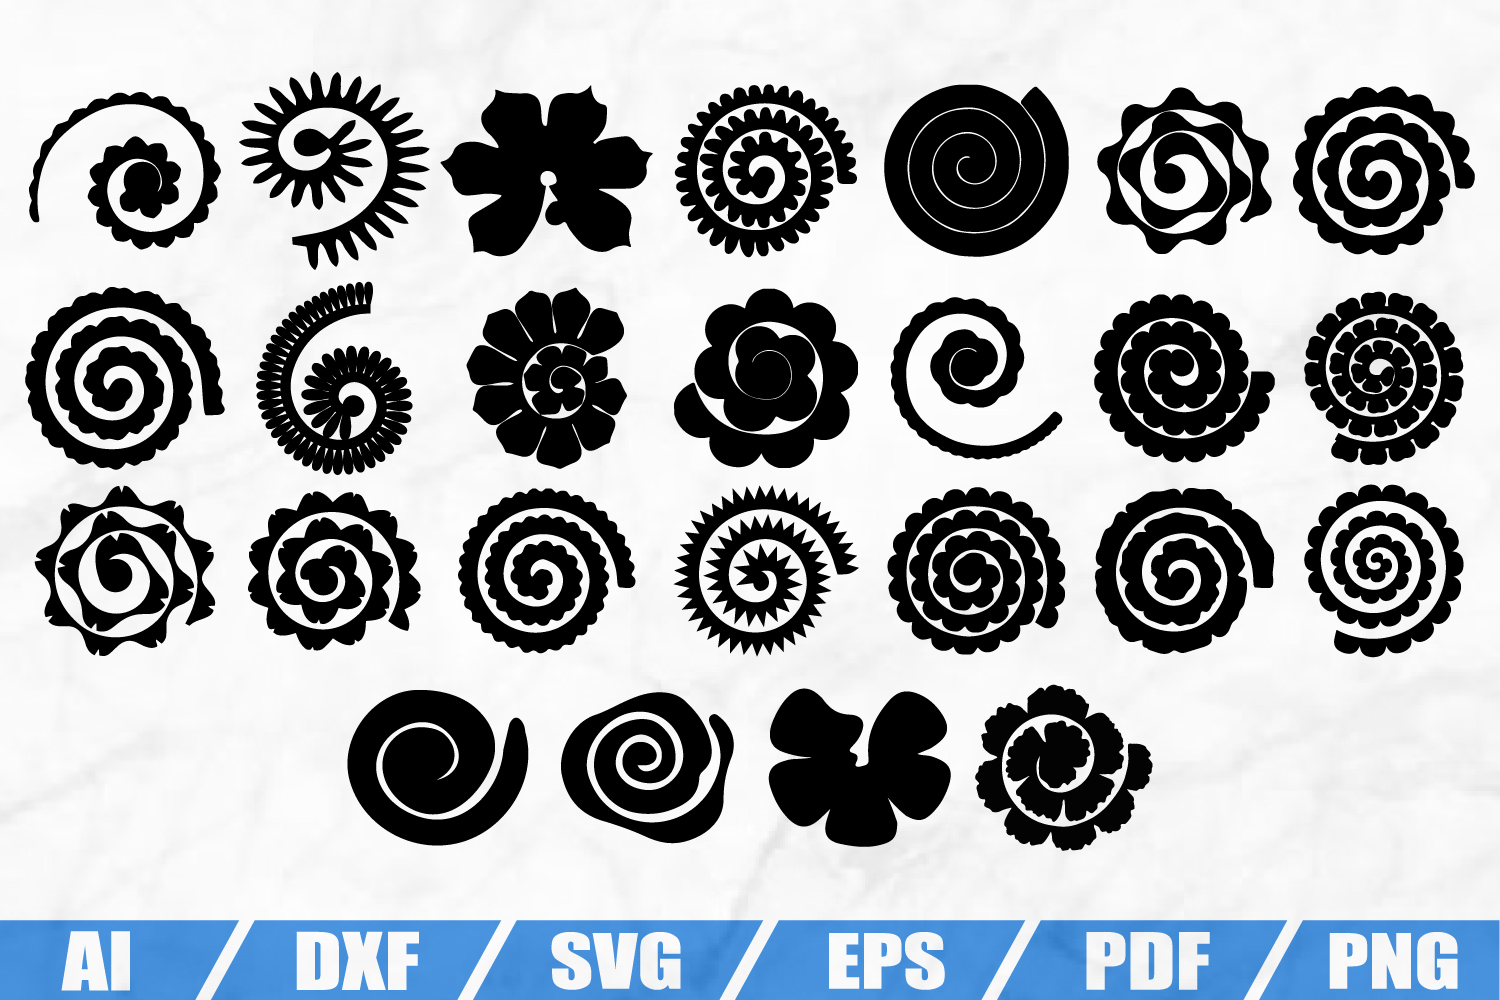 Svg Rolled Paper Flower Template